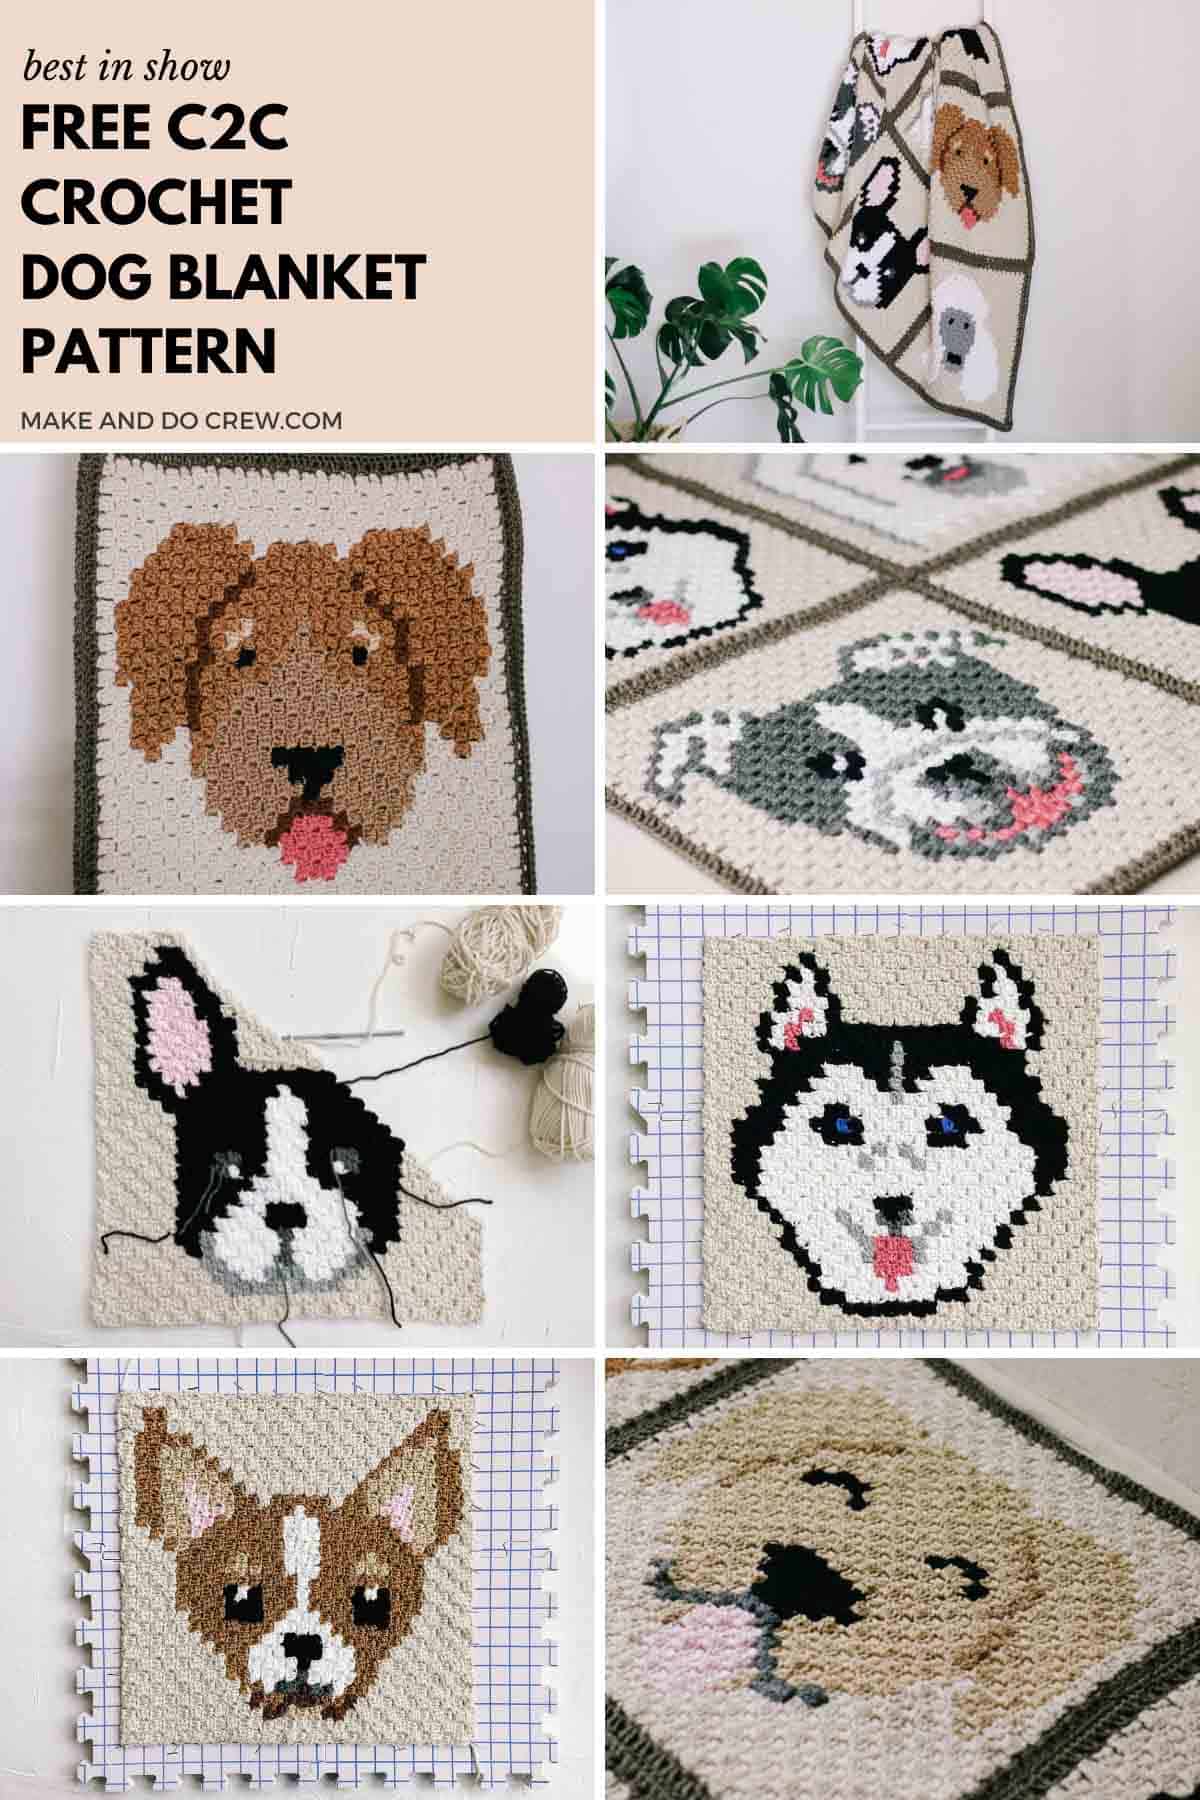 This image shows a free crochet pattern for a dog breed c2c crochet blanket. The images show the different breeds of dogs featured.